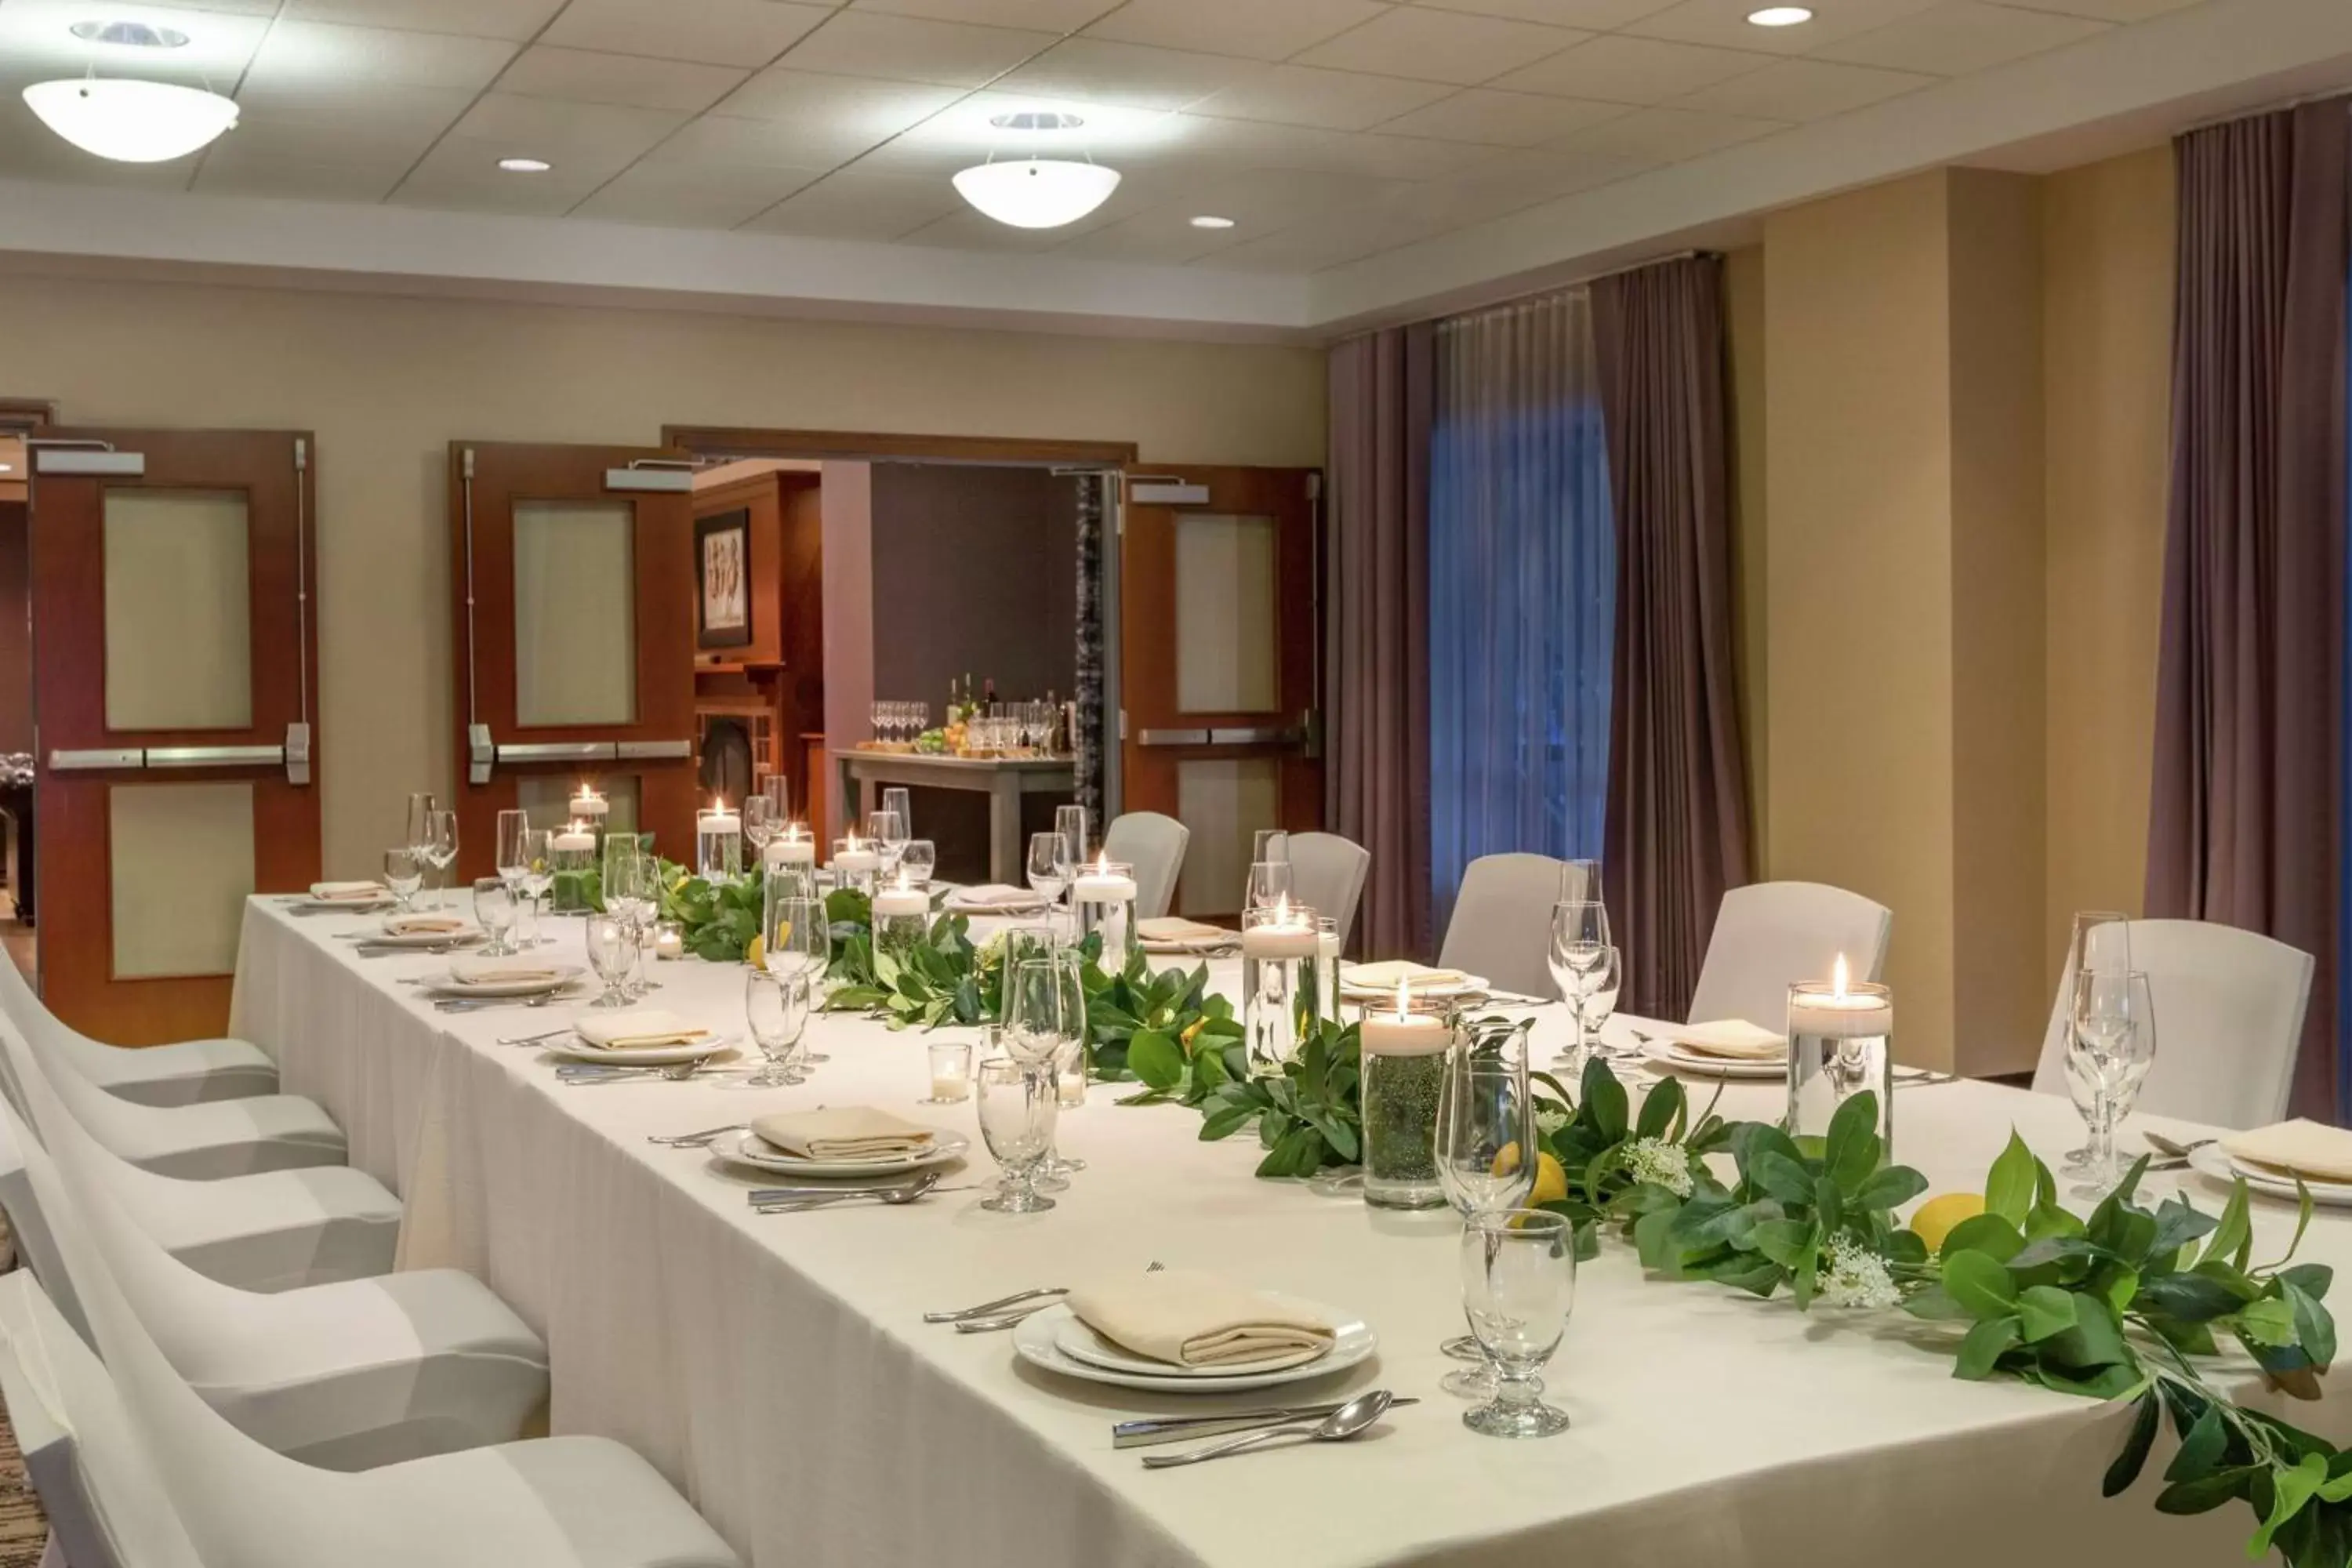 Meeting/conference room, Banquet Facilities in Hilton Garden Inn Troy